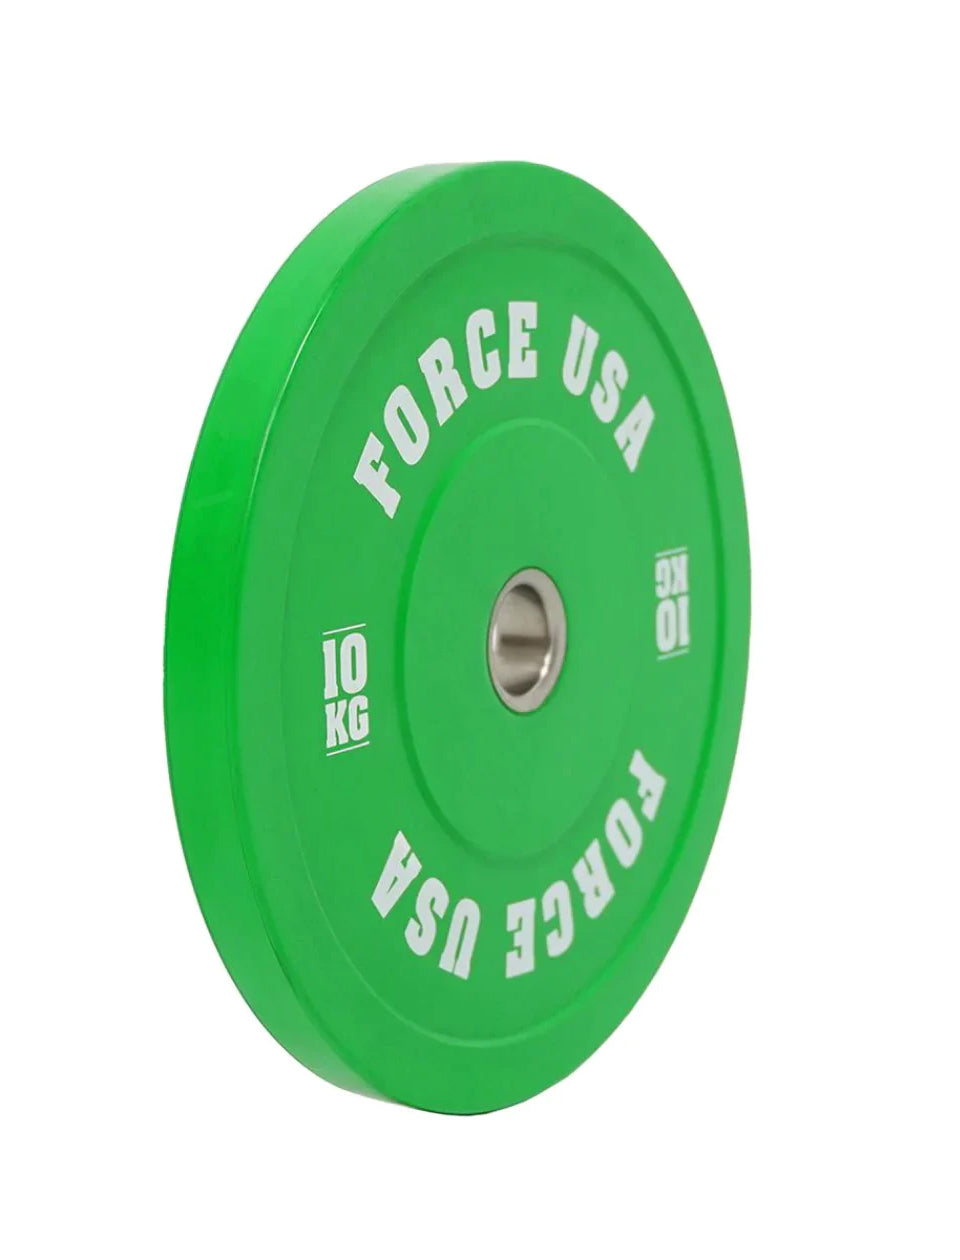 FORCE USA Pro Grade Coloured Bumper Plates 5 to 25 kg